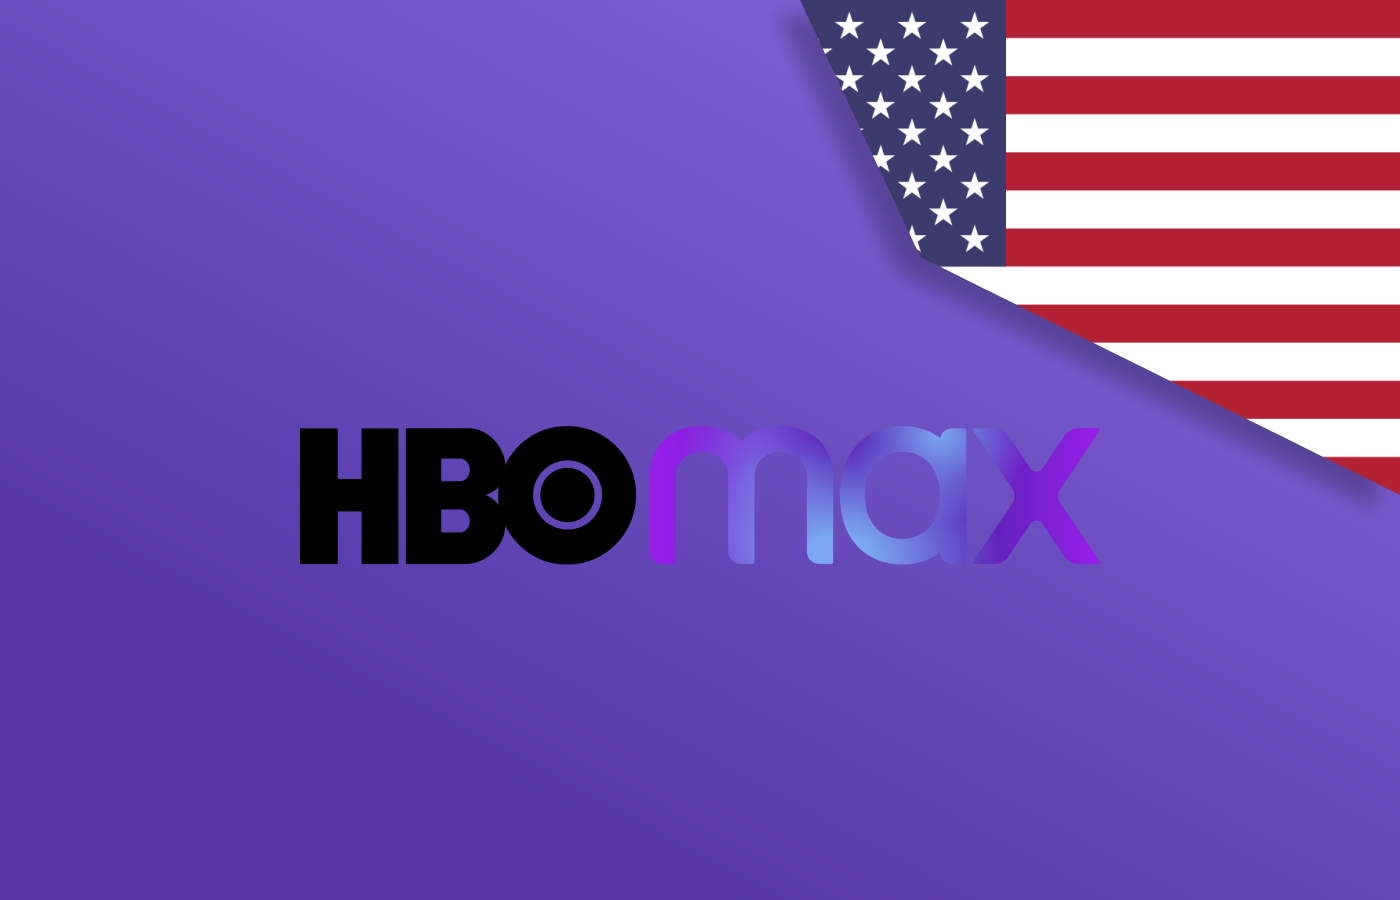 Watch HBO Max Outside USA